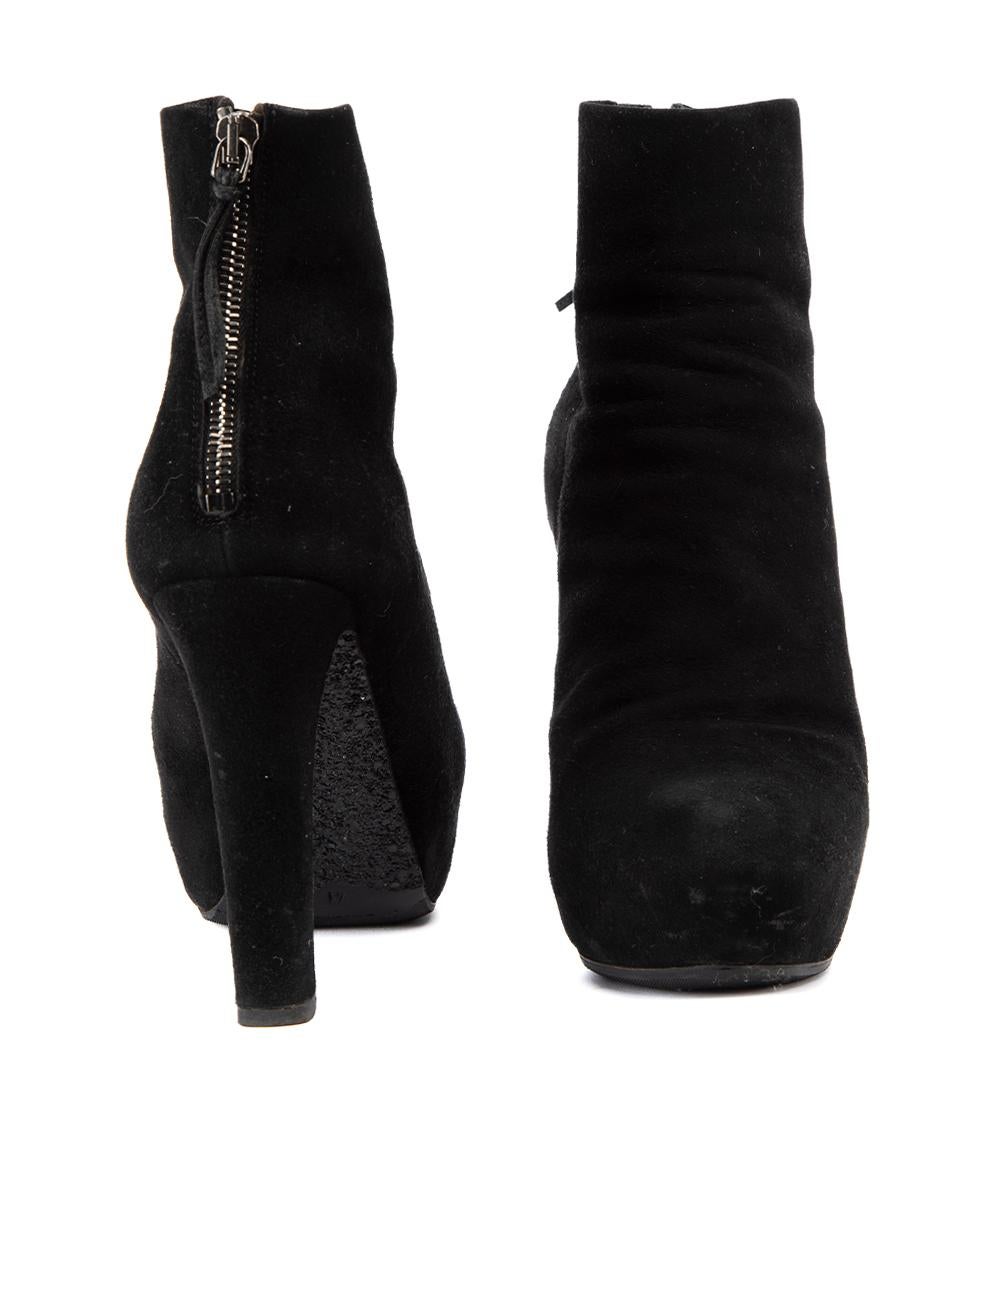 Pre-Loved Miu Miu Women's Black Suede Ankle Boots with Glitter Sole In Good Condition For Sale In London, GB